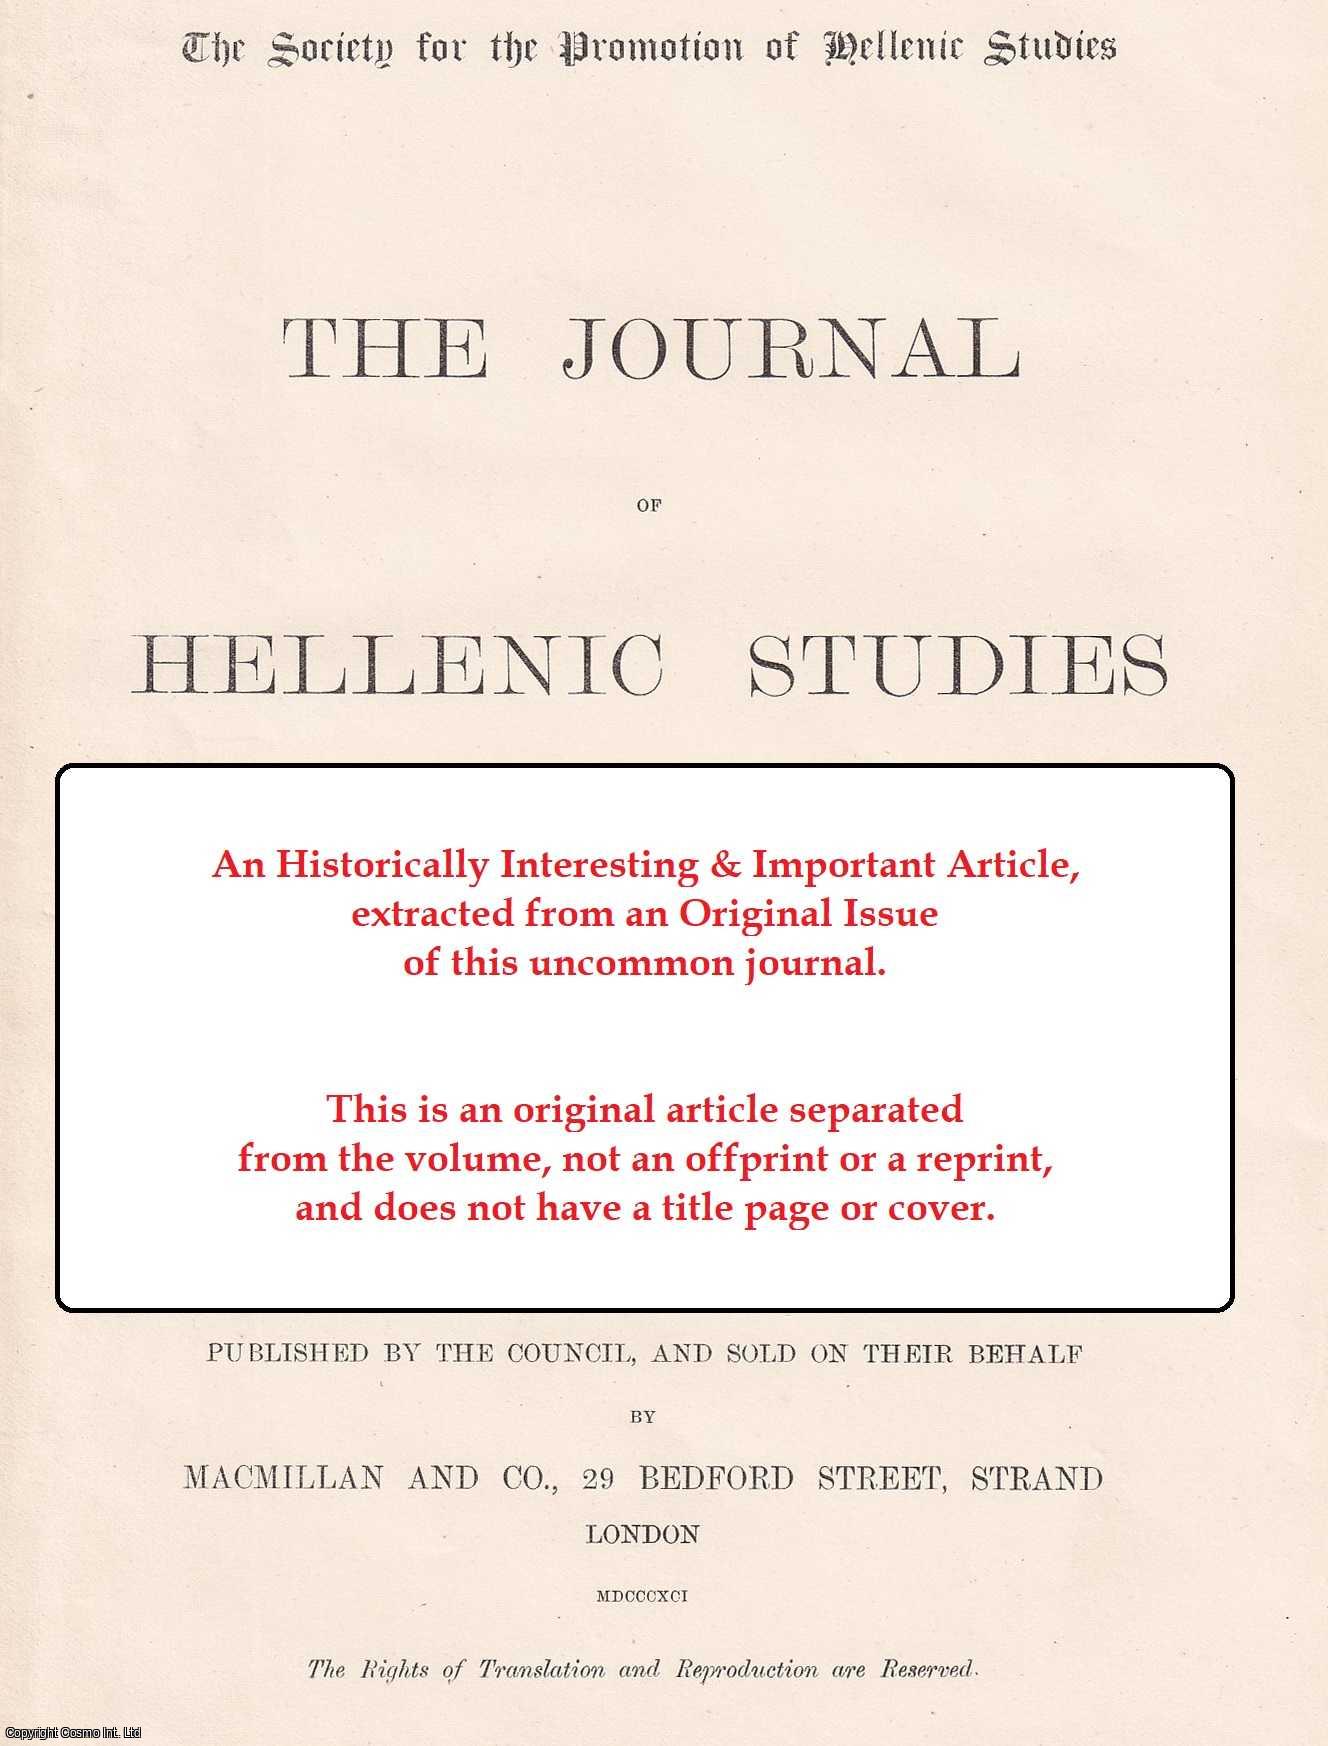 W. Rhys Roberts - The Greek Treatise on the Sublime; its Authorship. An uncommon original article from the journal of Hellenic studies, 1897.